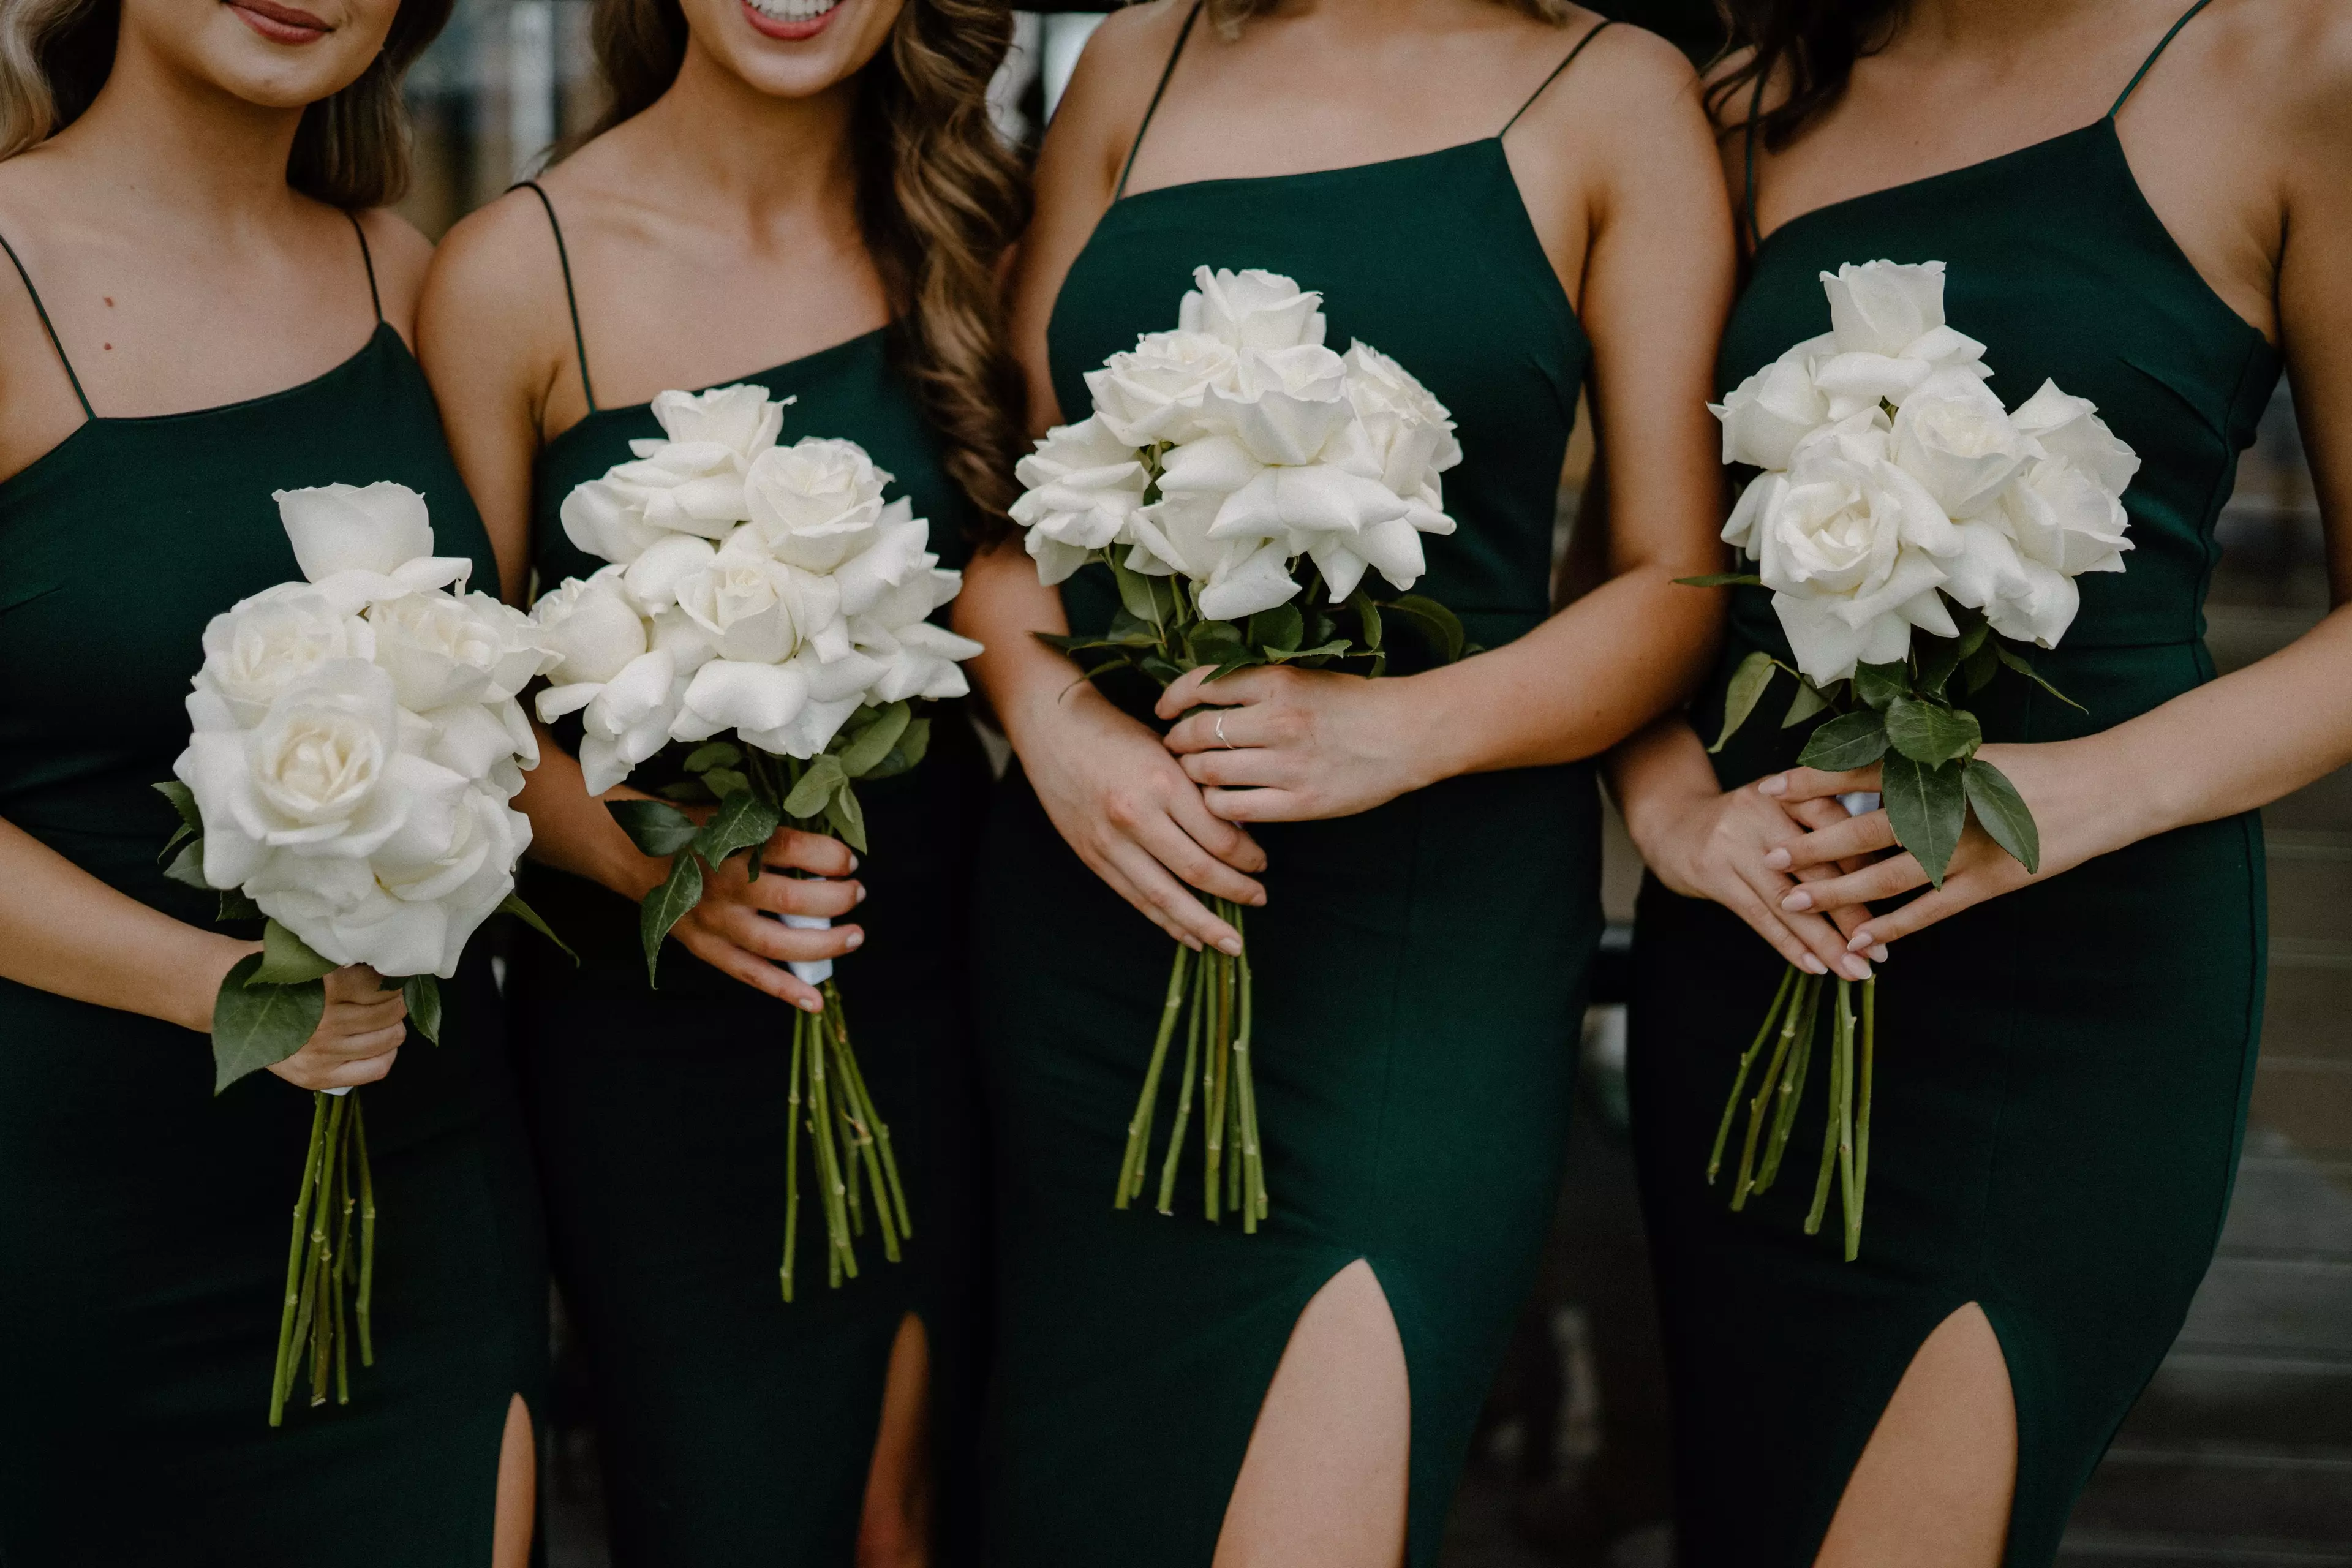 Bridesmaids were asked not to put on weight before the wedding (